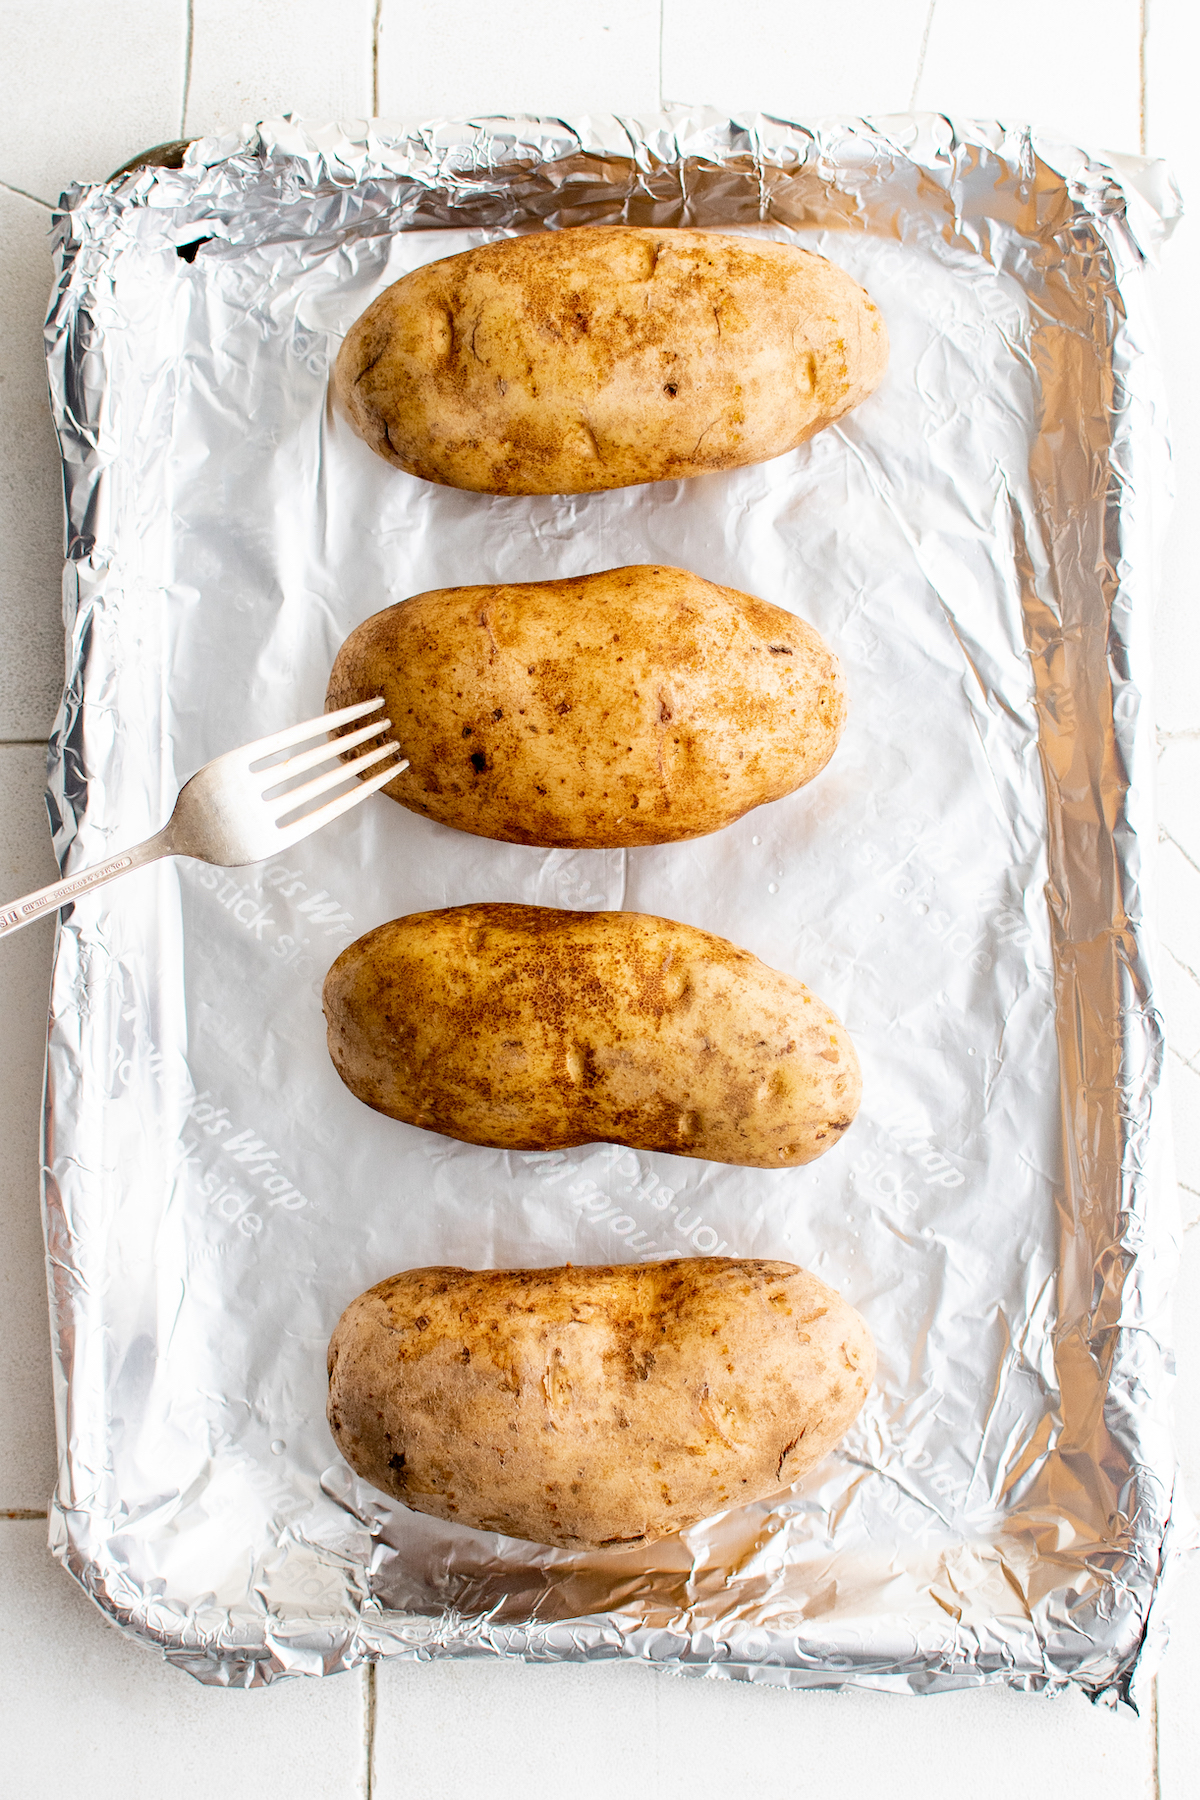 Four potatoes on a baking sheet with a fork.